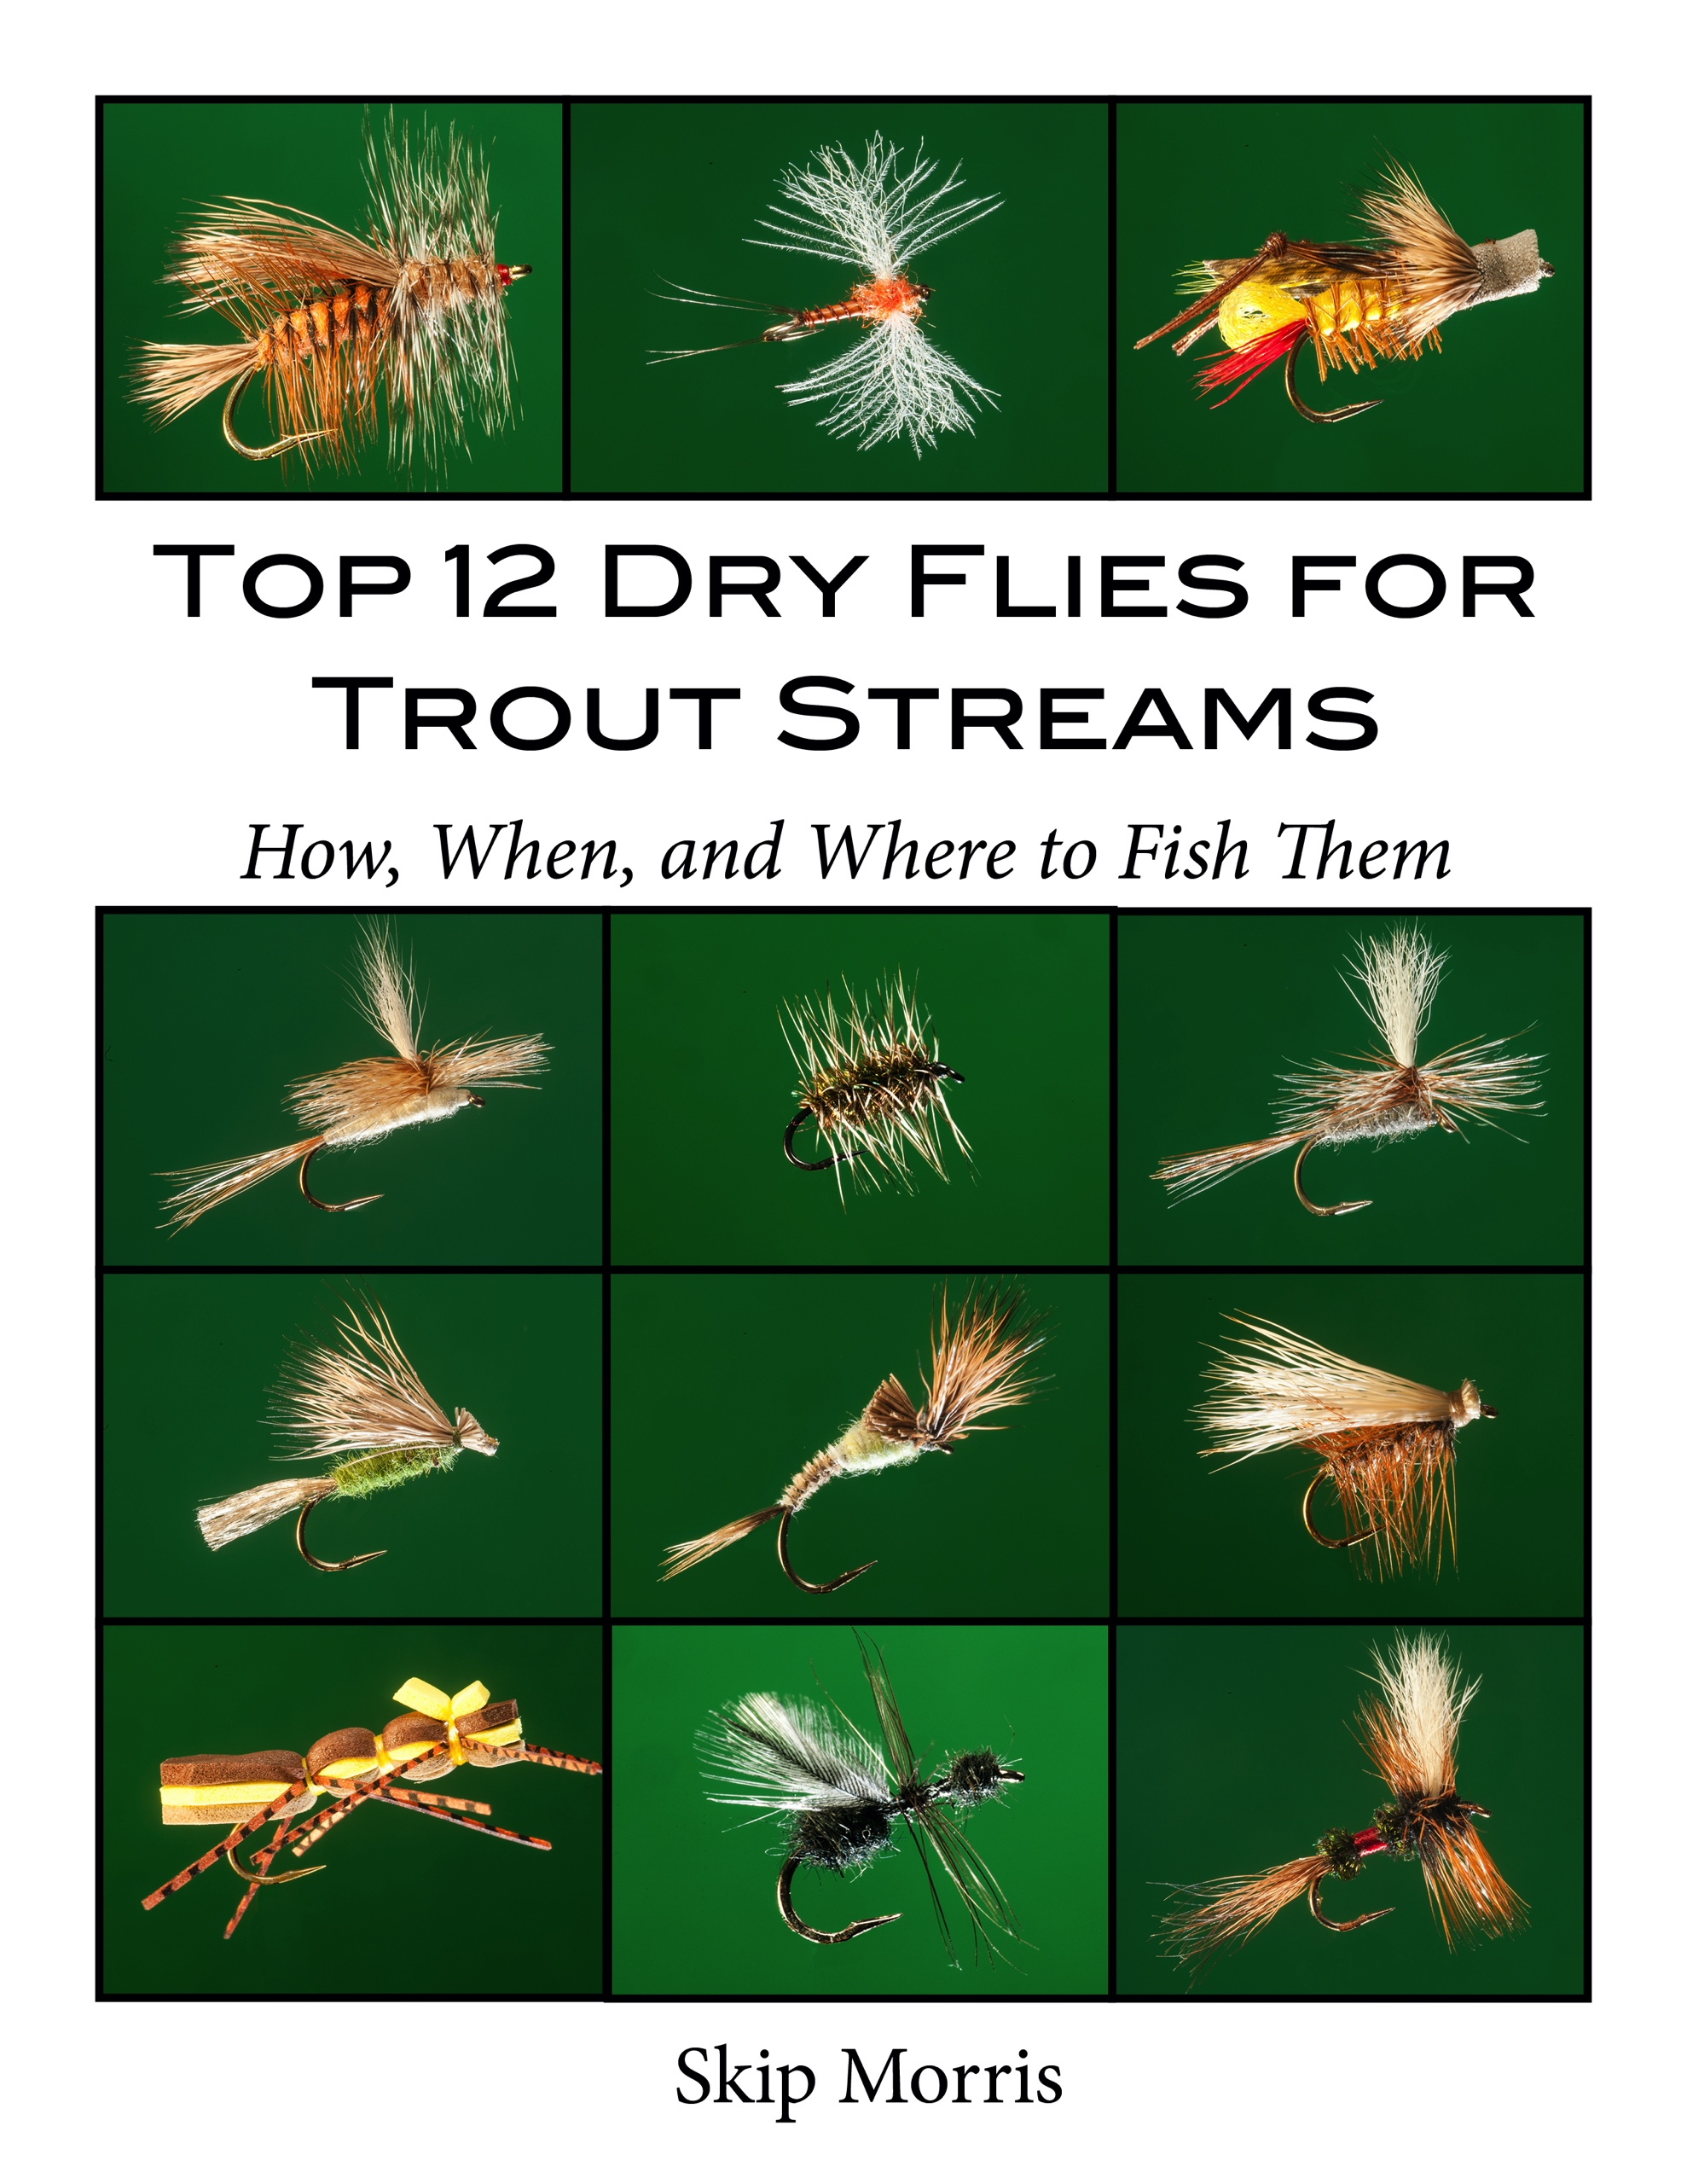 Beginners Guide to Fly Fishing - FREE Ebook